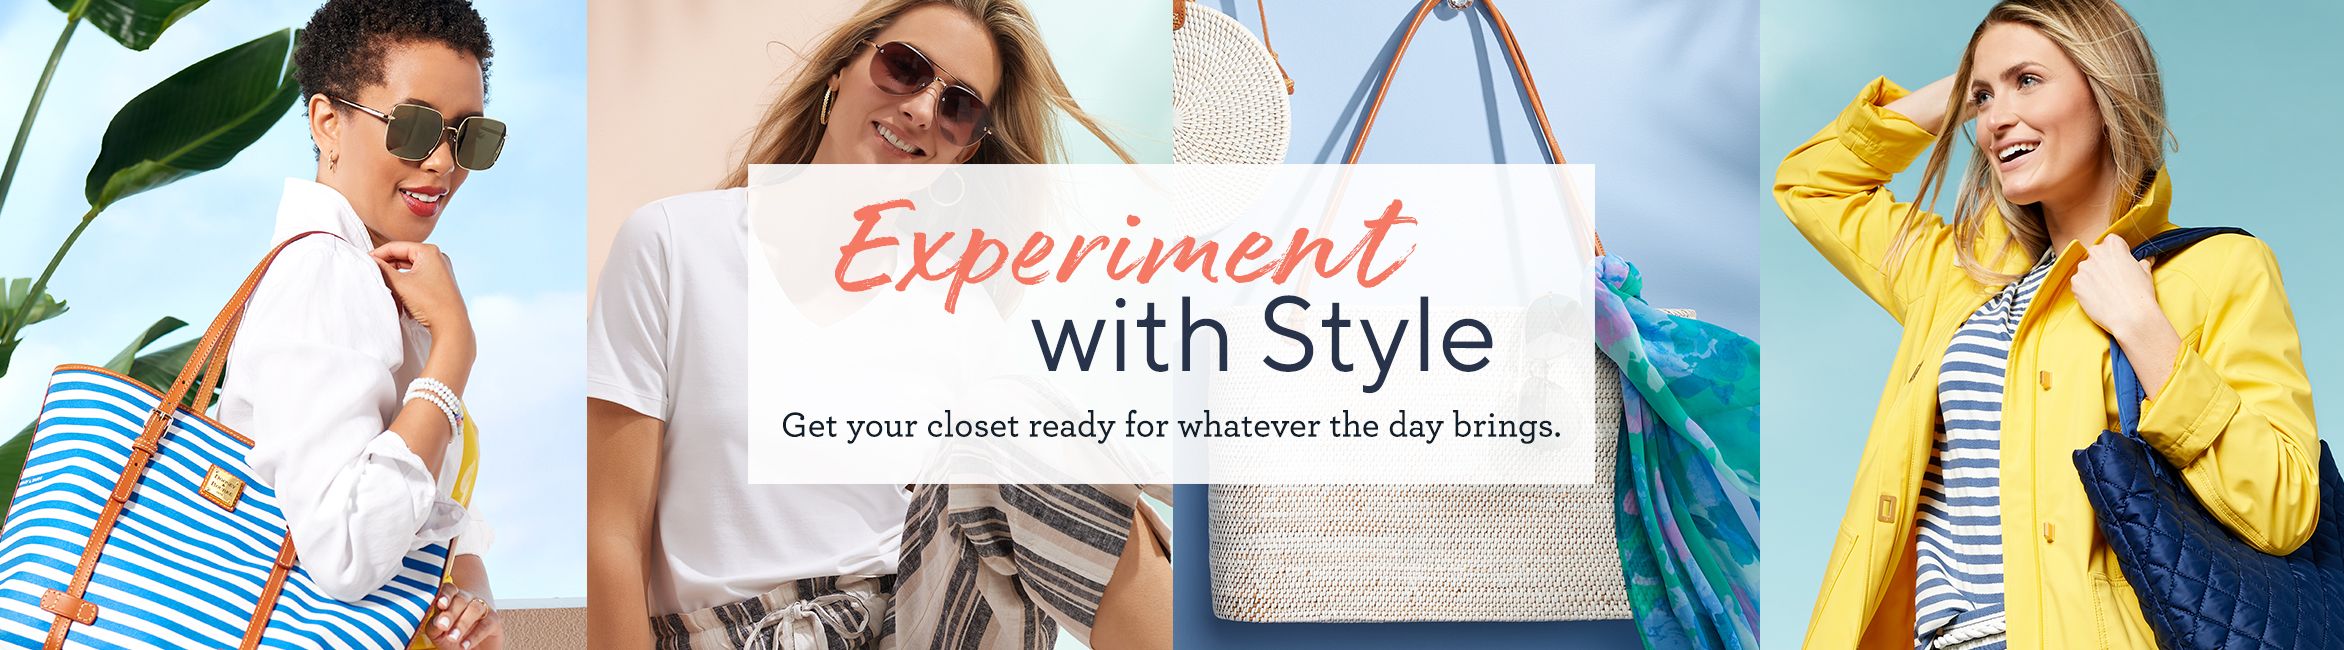 Experiment with Style  Get your closet ready for whatever the day brings.